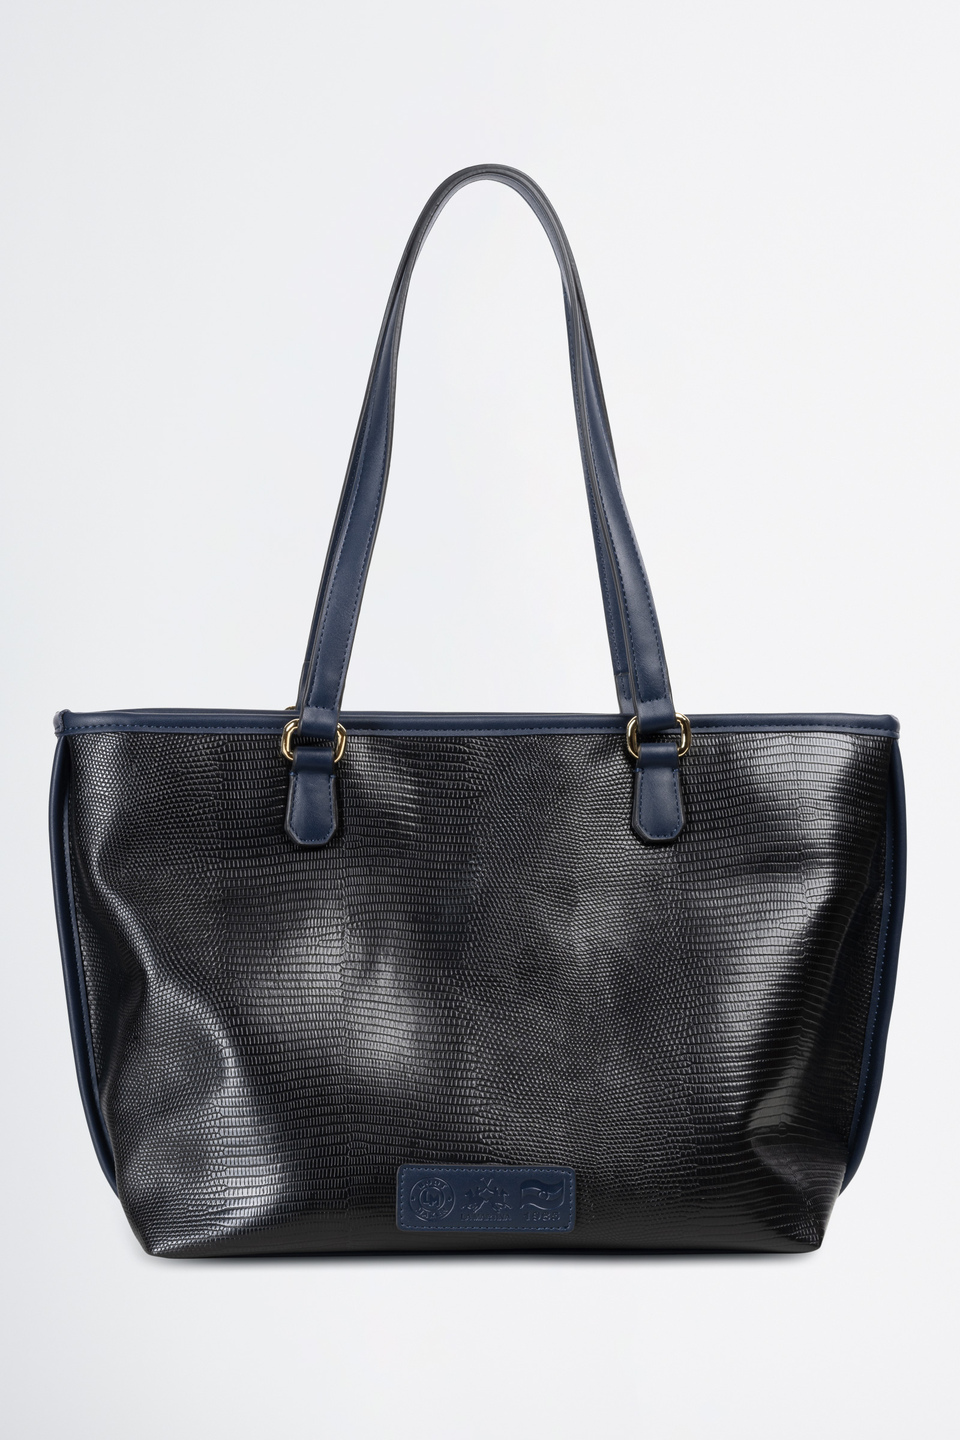 Double handle shopper in PU synthetic fabric | La Martina - Official Online Shop